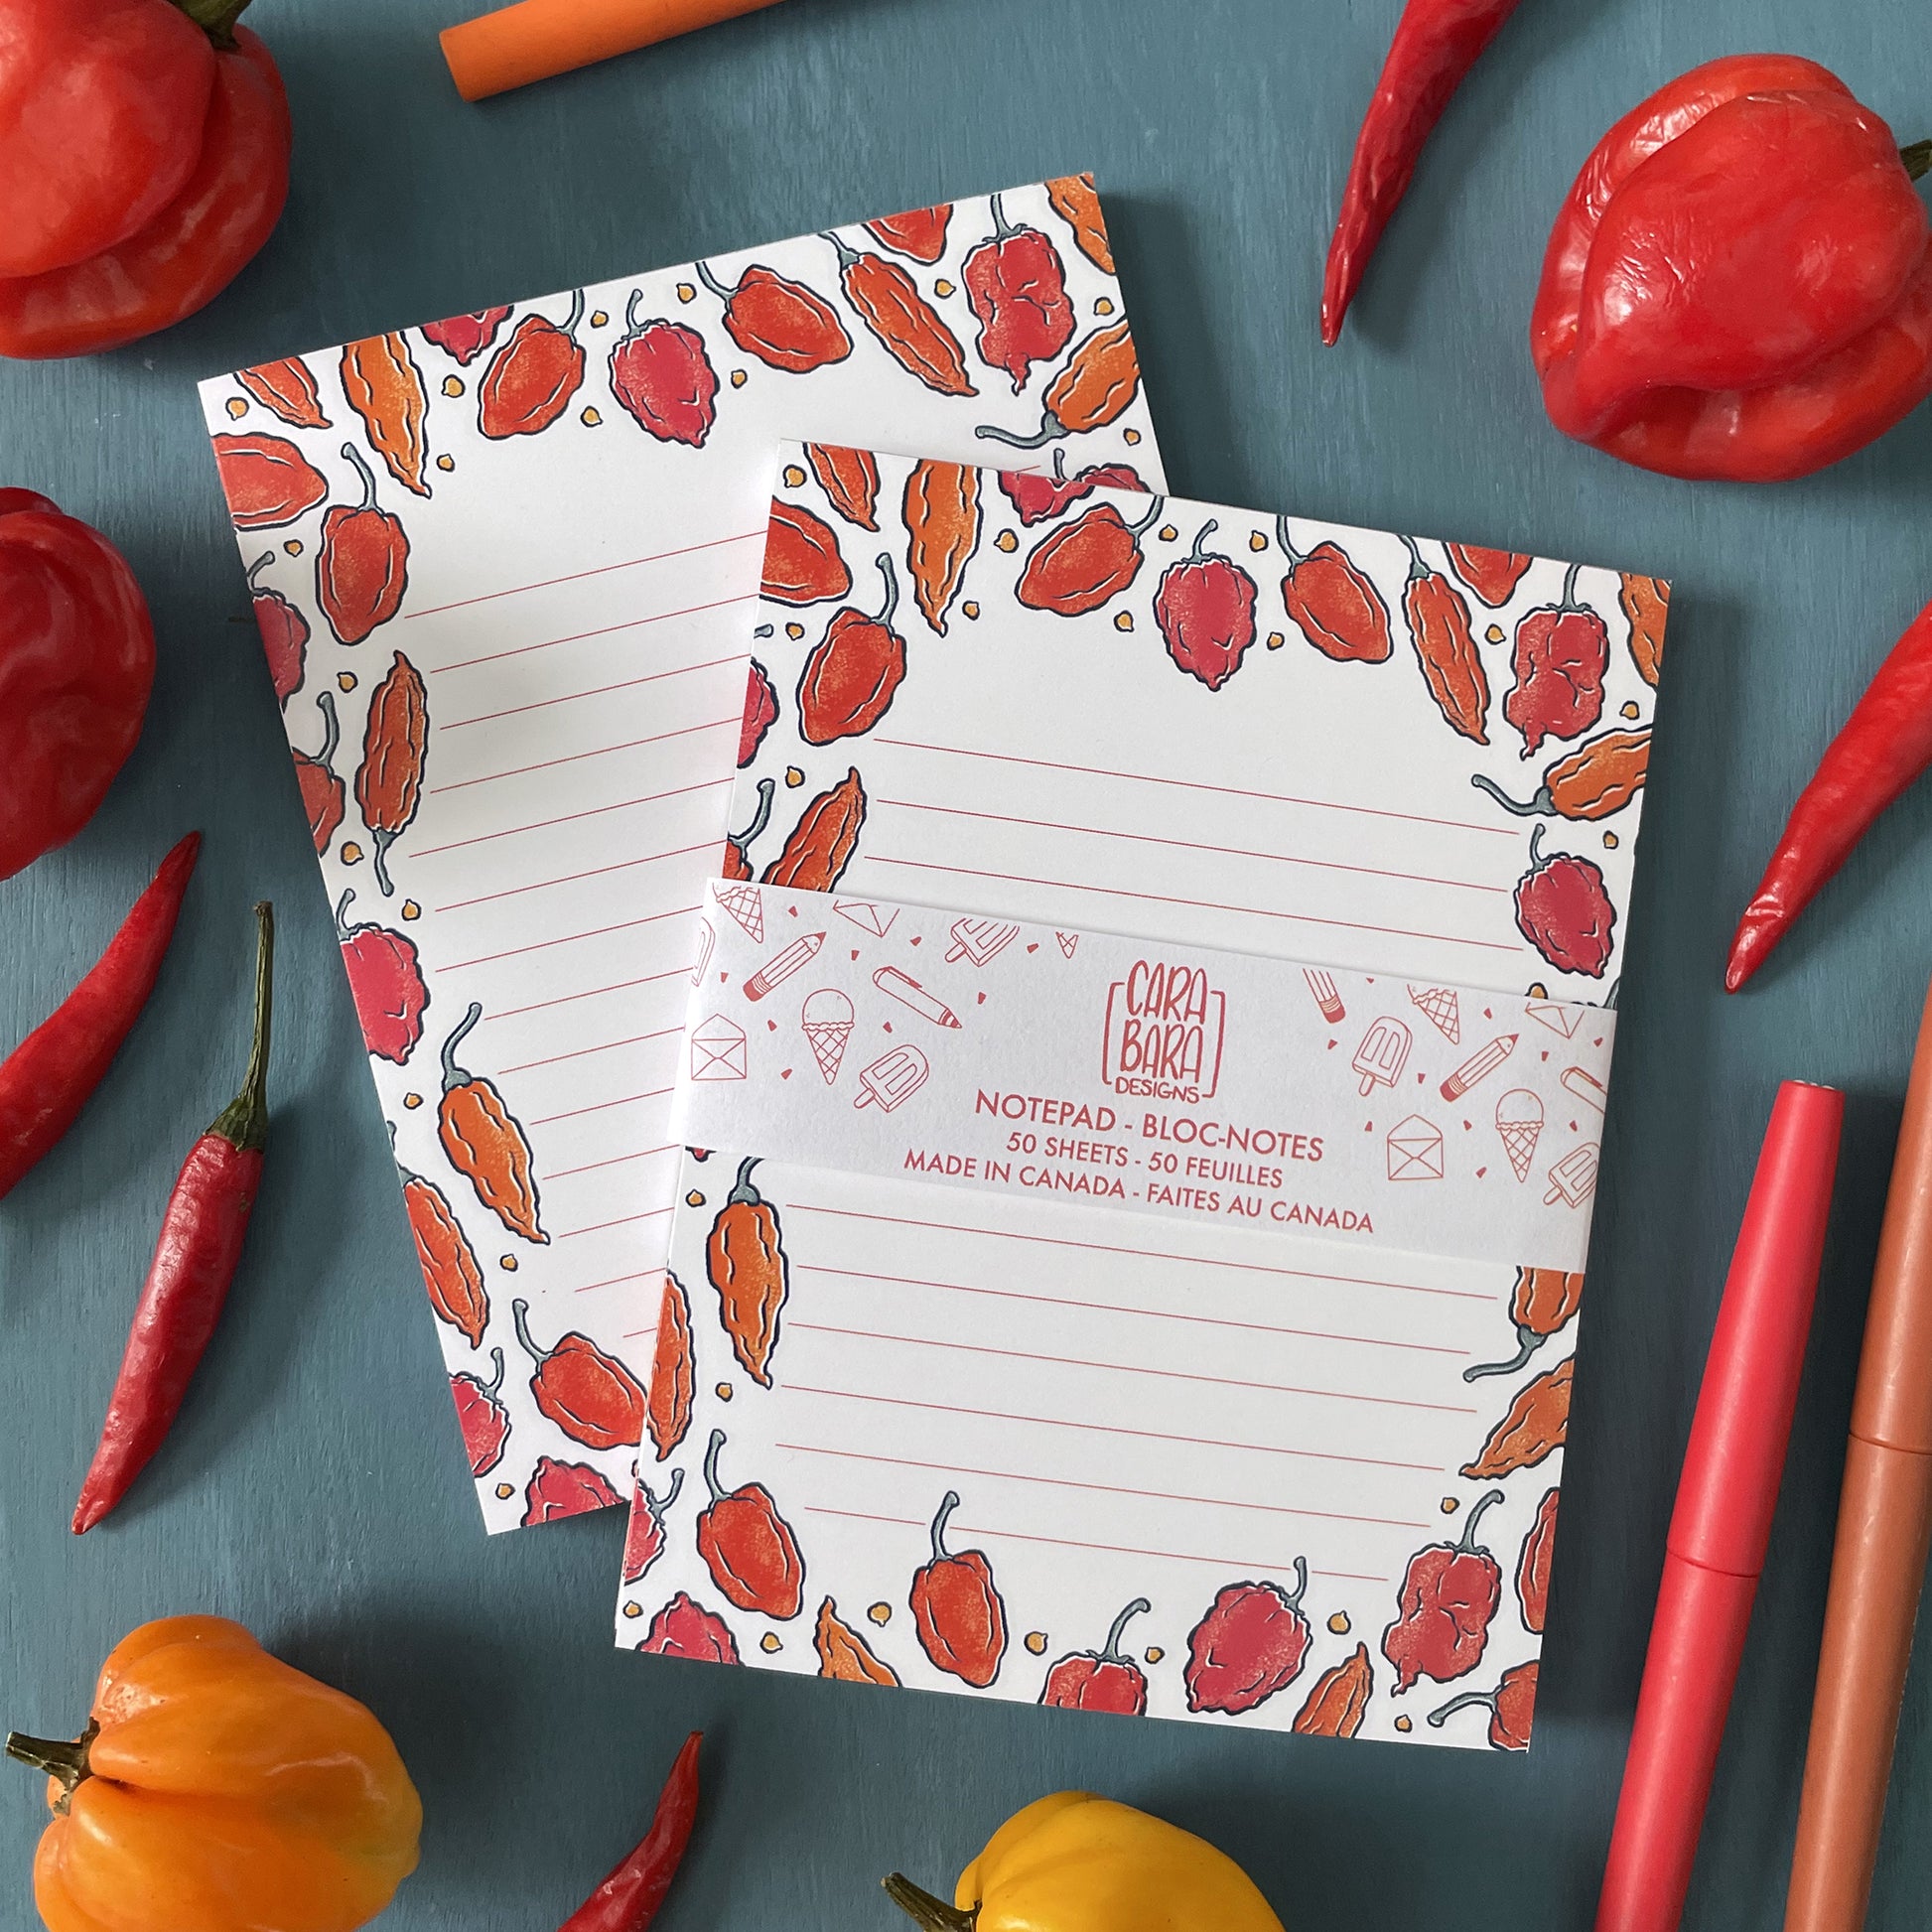 A pair of white lined notepad features illustrations of hot peppers in orange and red. The front notepad is packaged in a belly band with the Carabara Designs logo and says the notepad is 50 pages and made in Canada. The tear-off notepads are surrounded by orange and red Scotch bonnet peppers, red thai chiles, and a red pen.